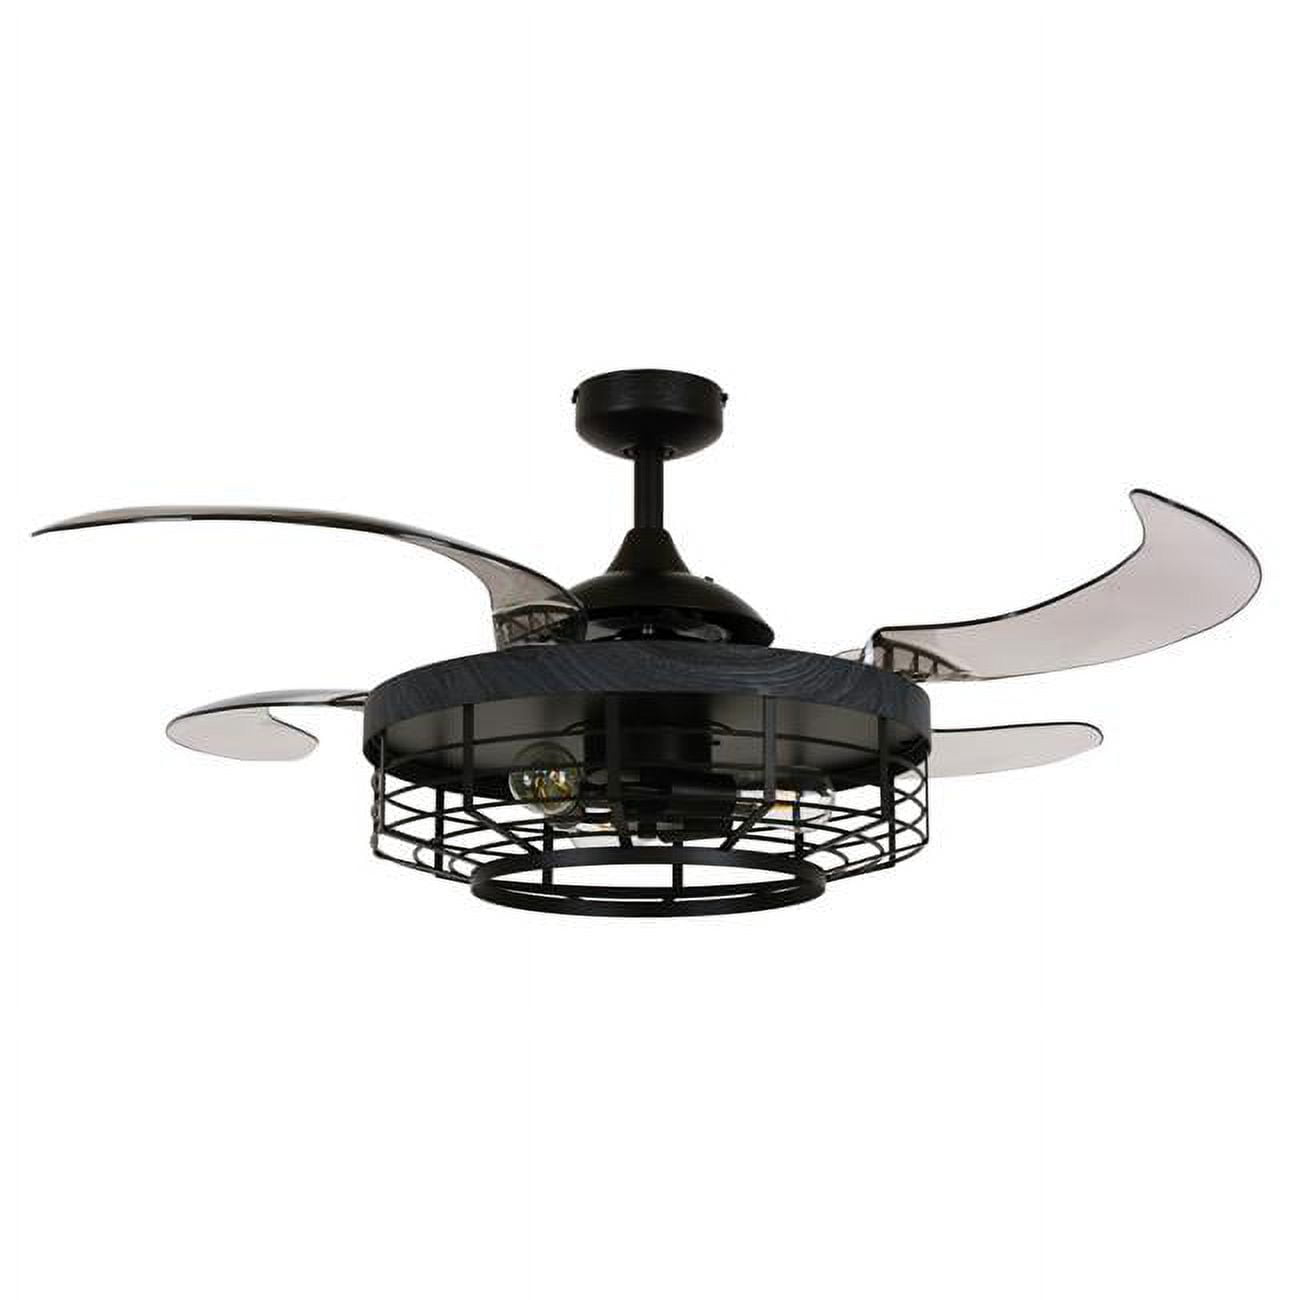 Picture of Fanaway 51106201 Fanaway 51106201 Montclair 48-inch Black with Black Trim AC Ceiling Fan with Light